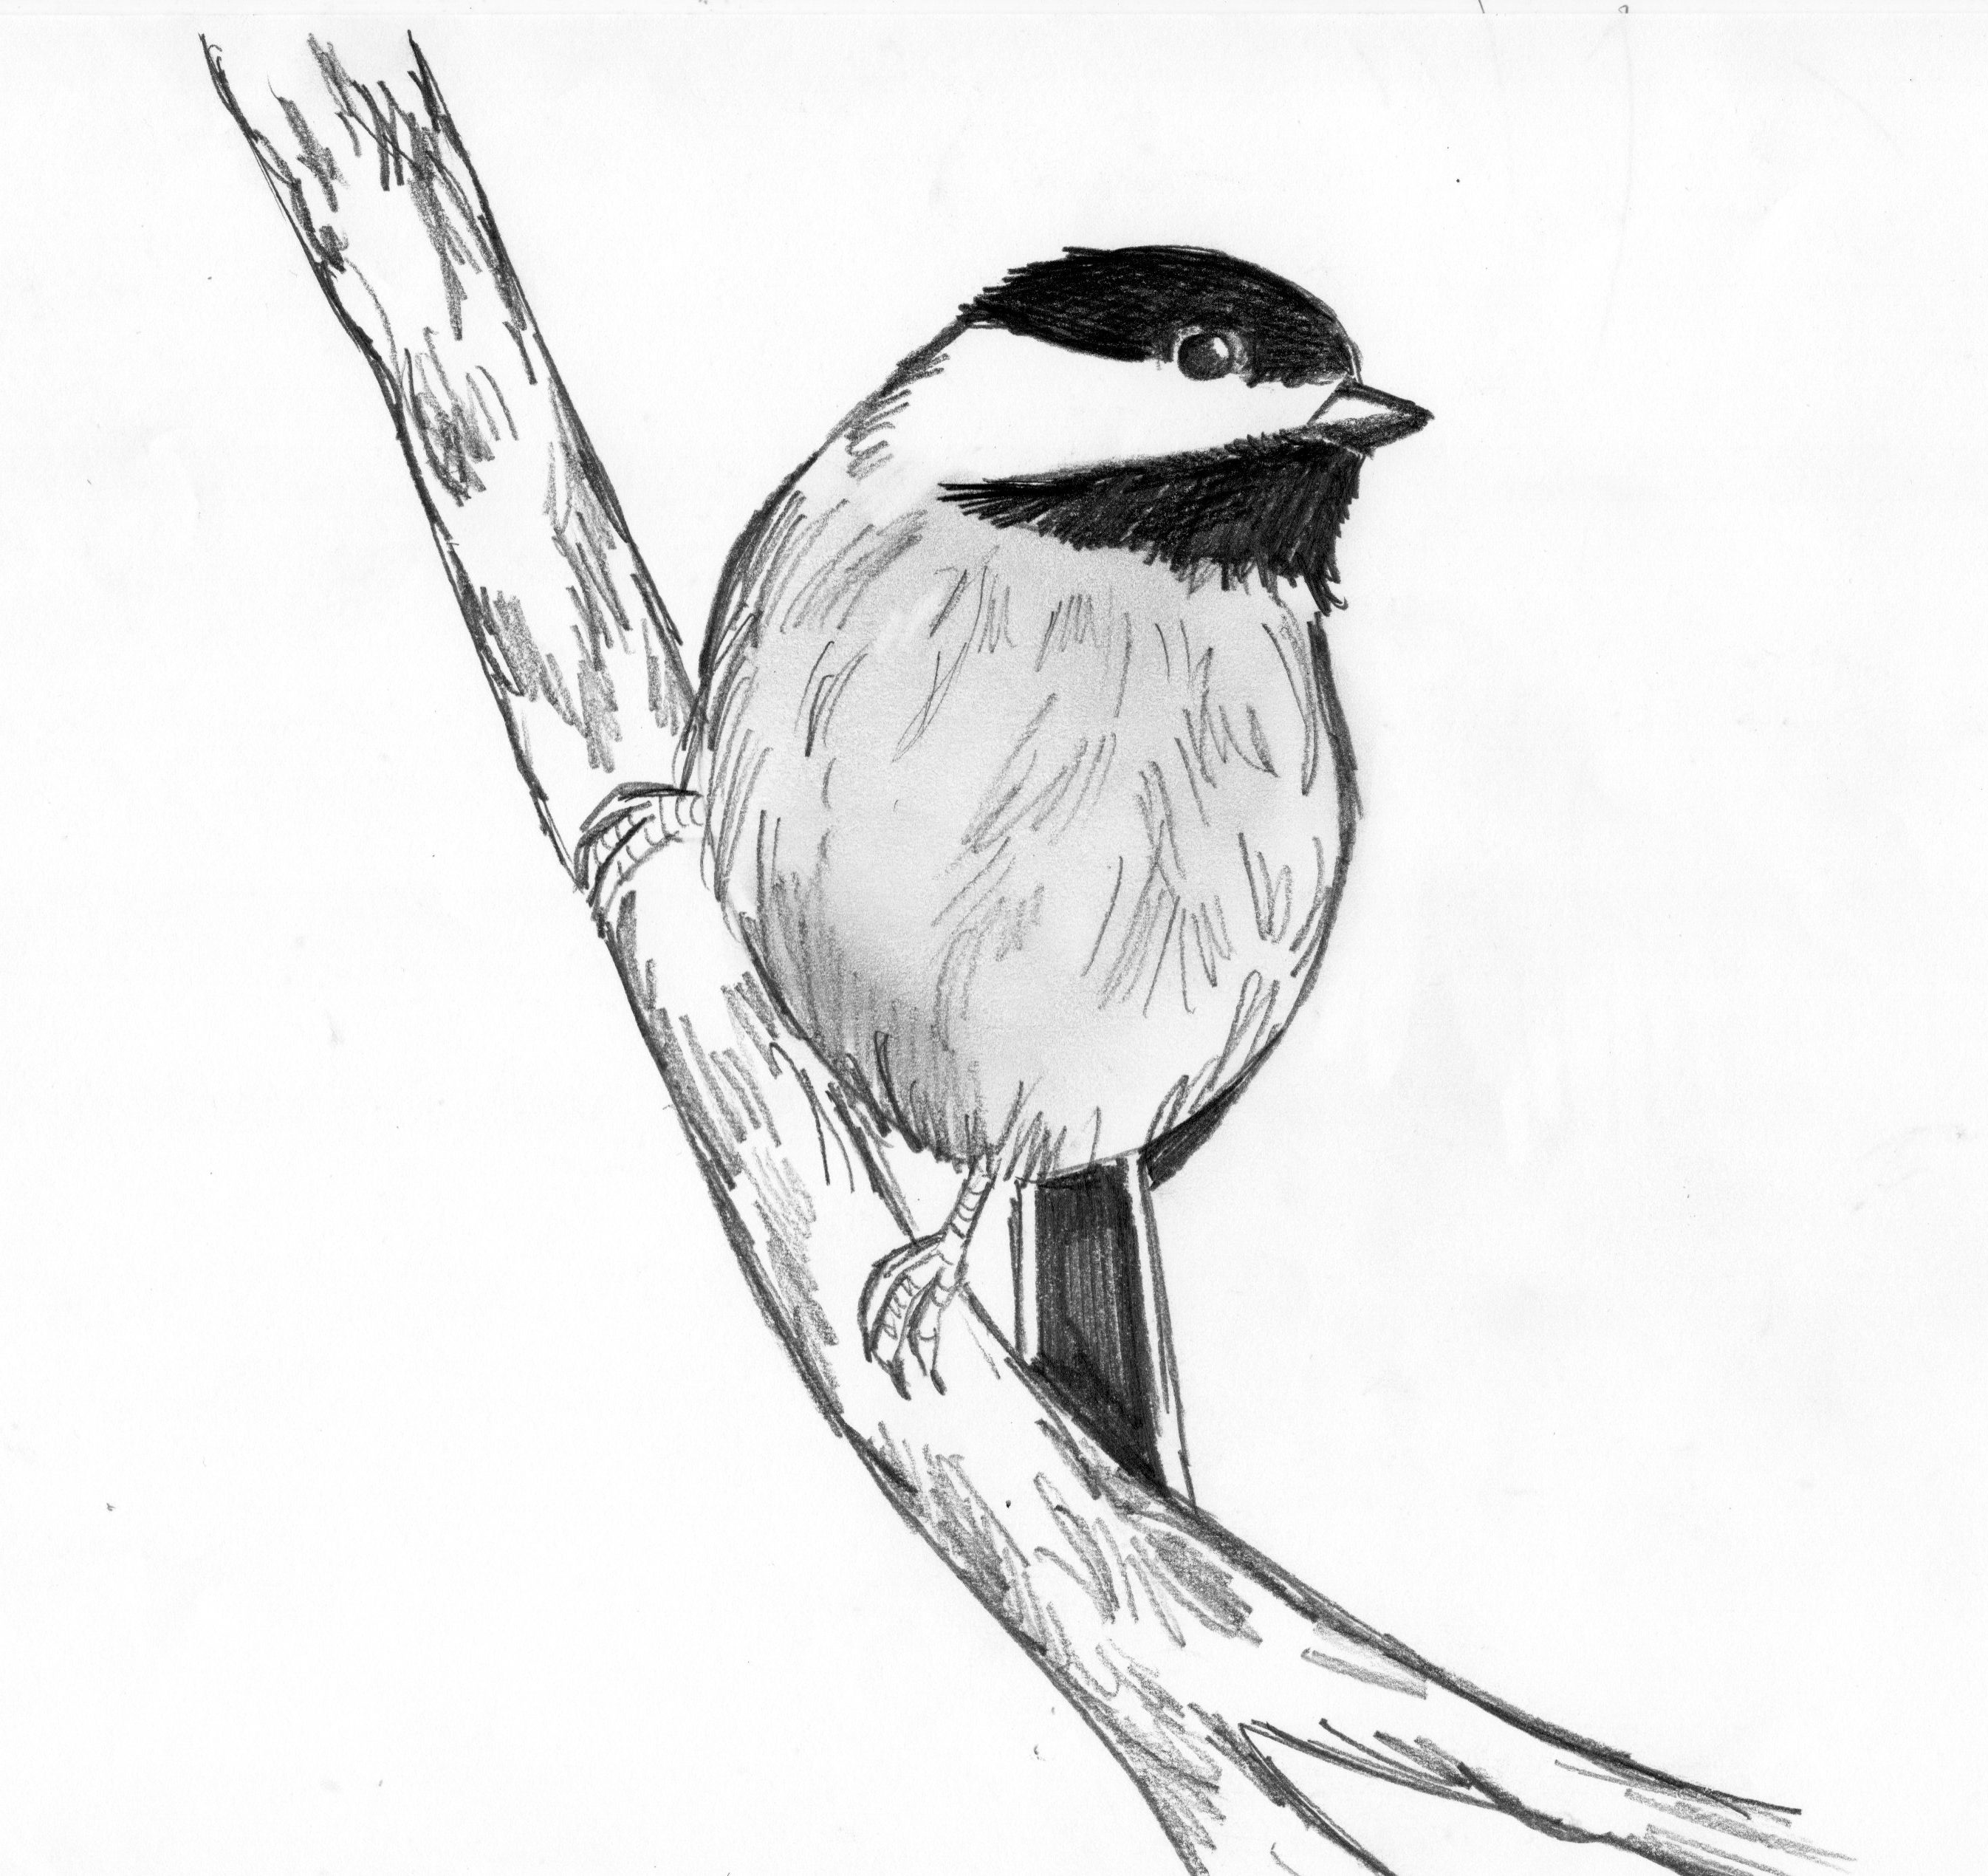 An attempt to draw a bird from an image I saw online. What can be